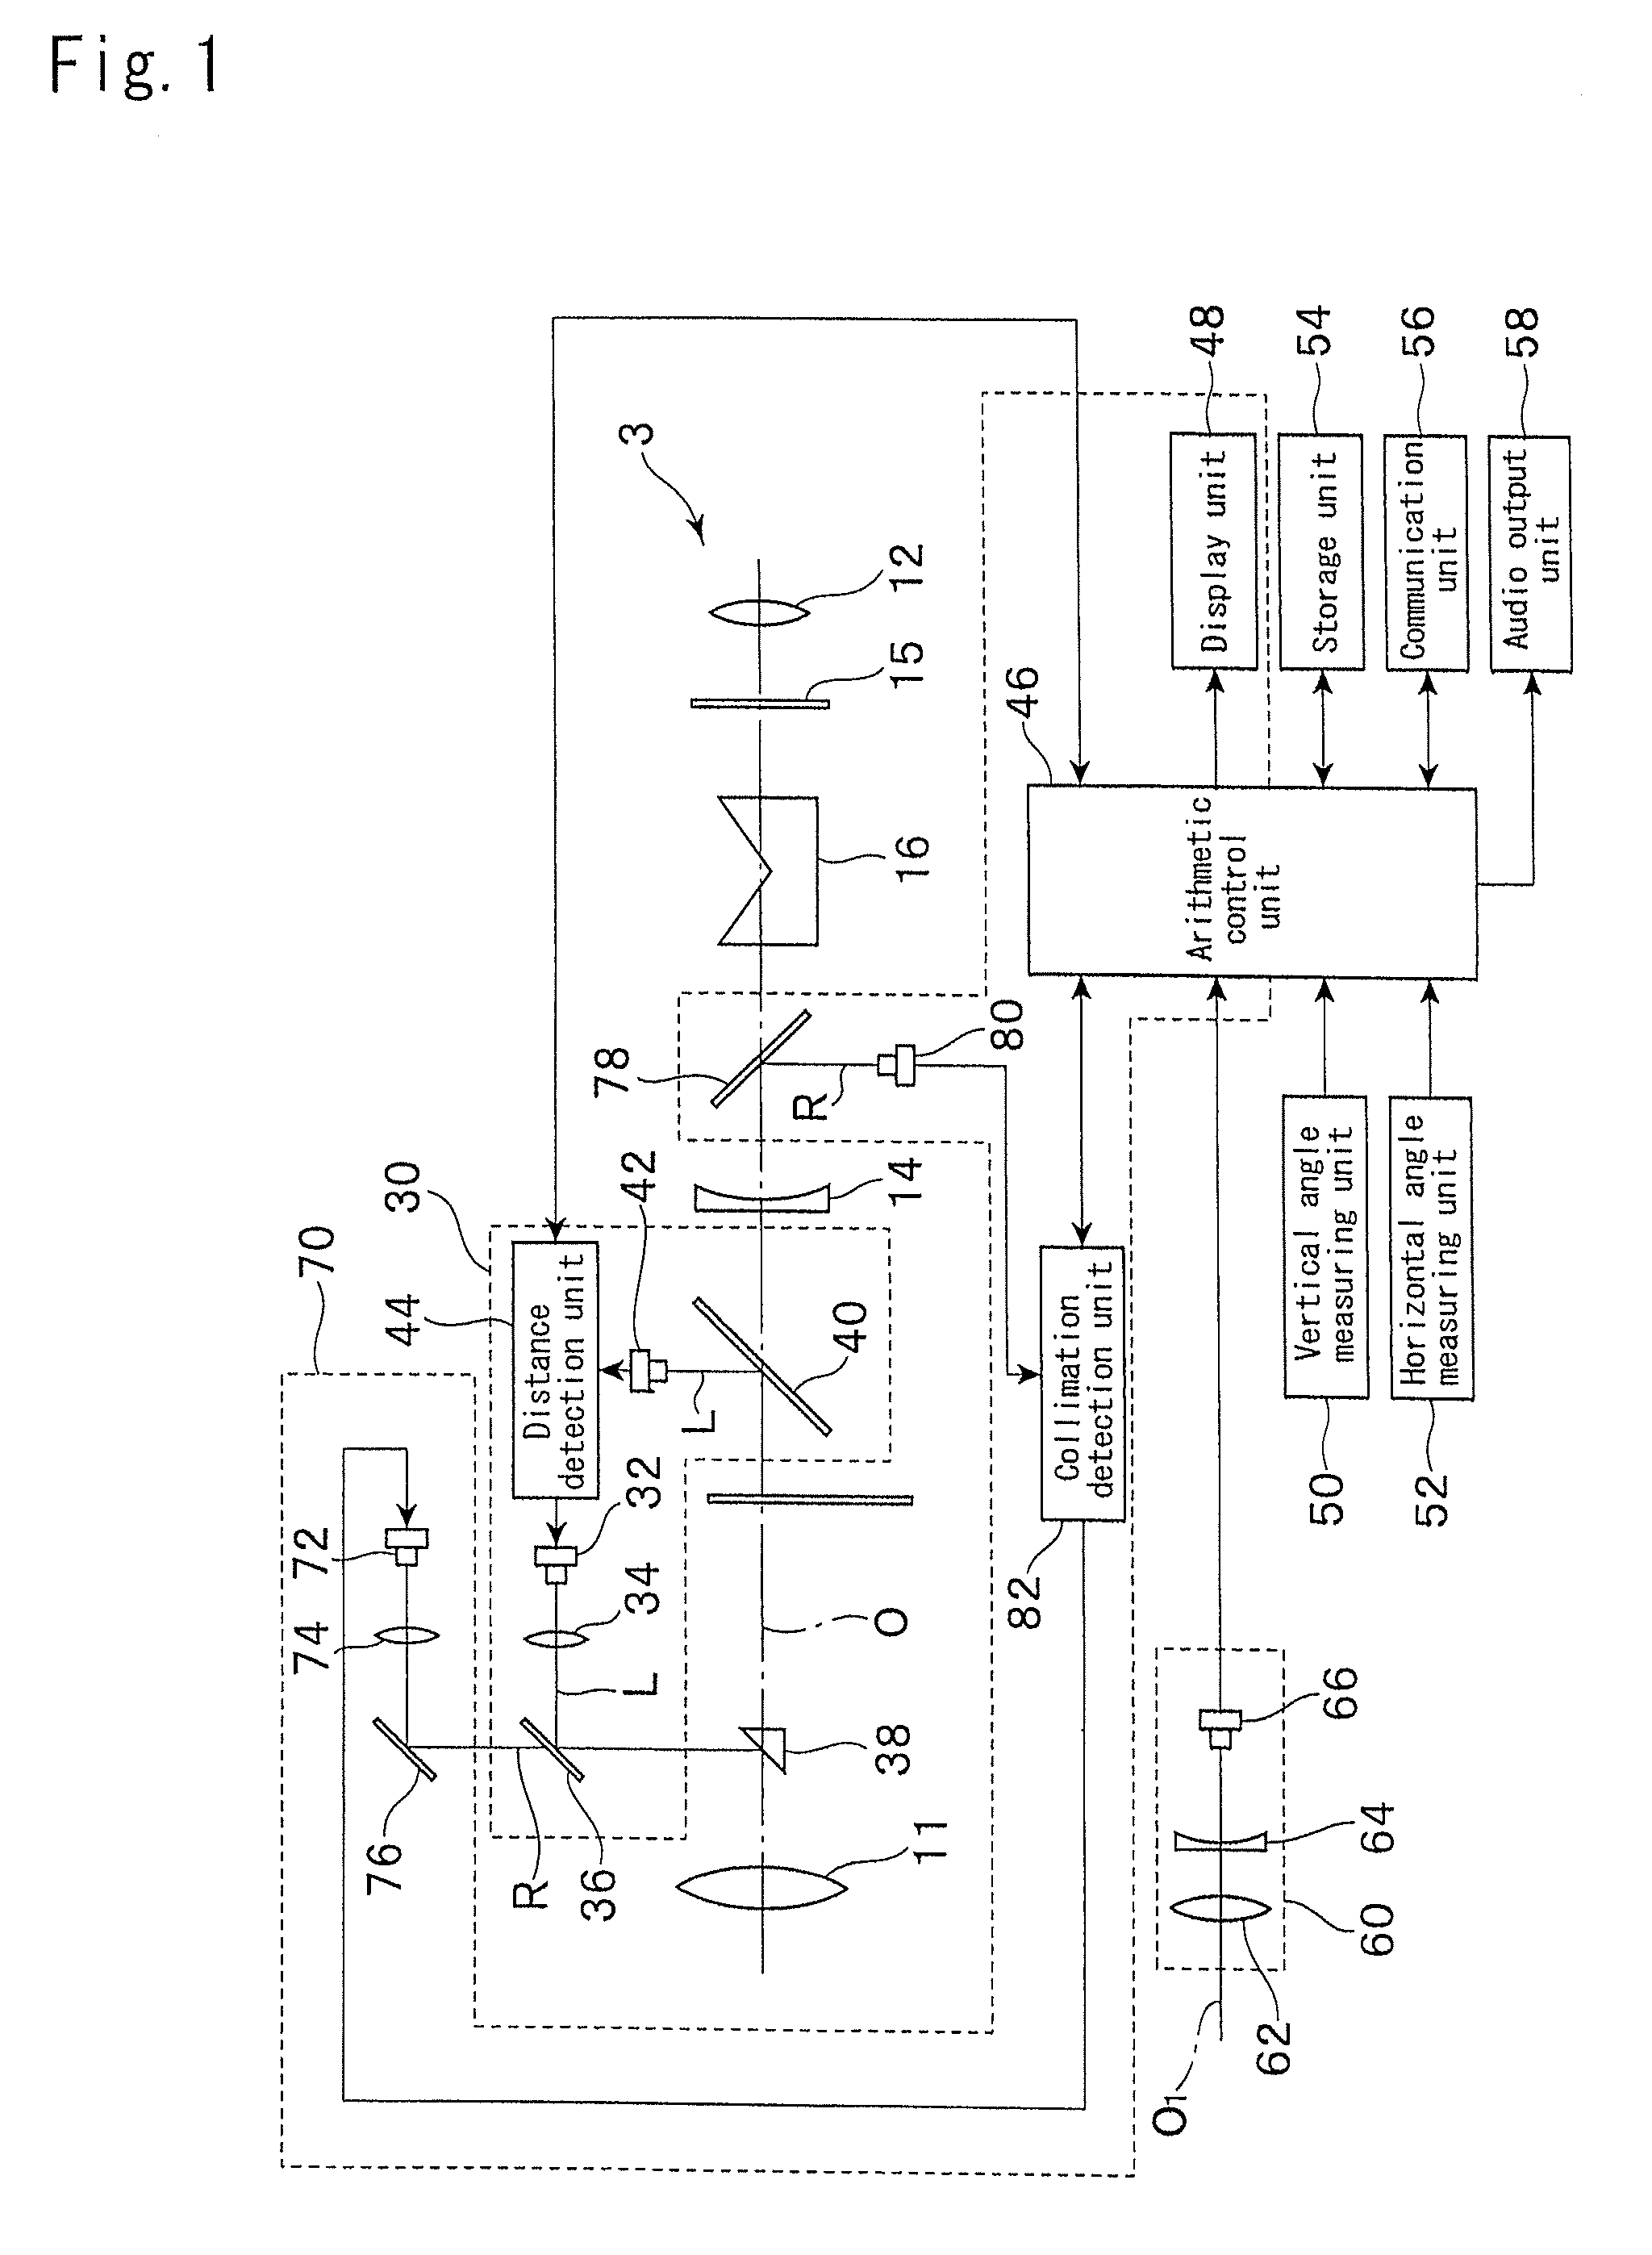 Manual surveying instrument having collimation assisting device